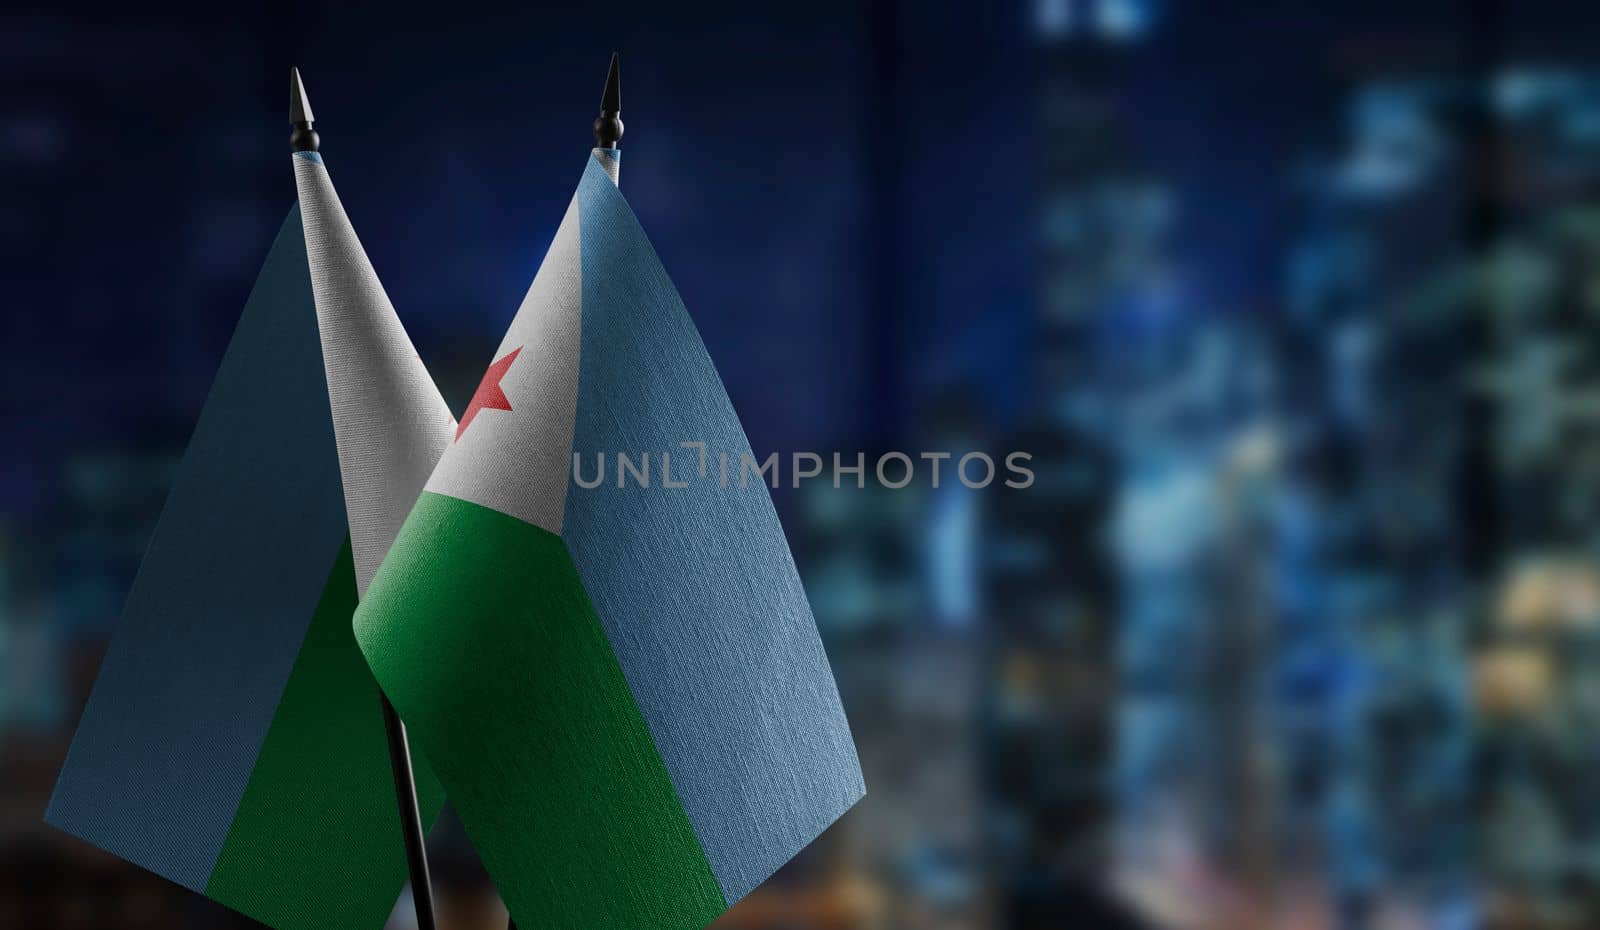 Small flags of the Djibouti on an abstract blurry background by butenkow